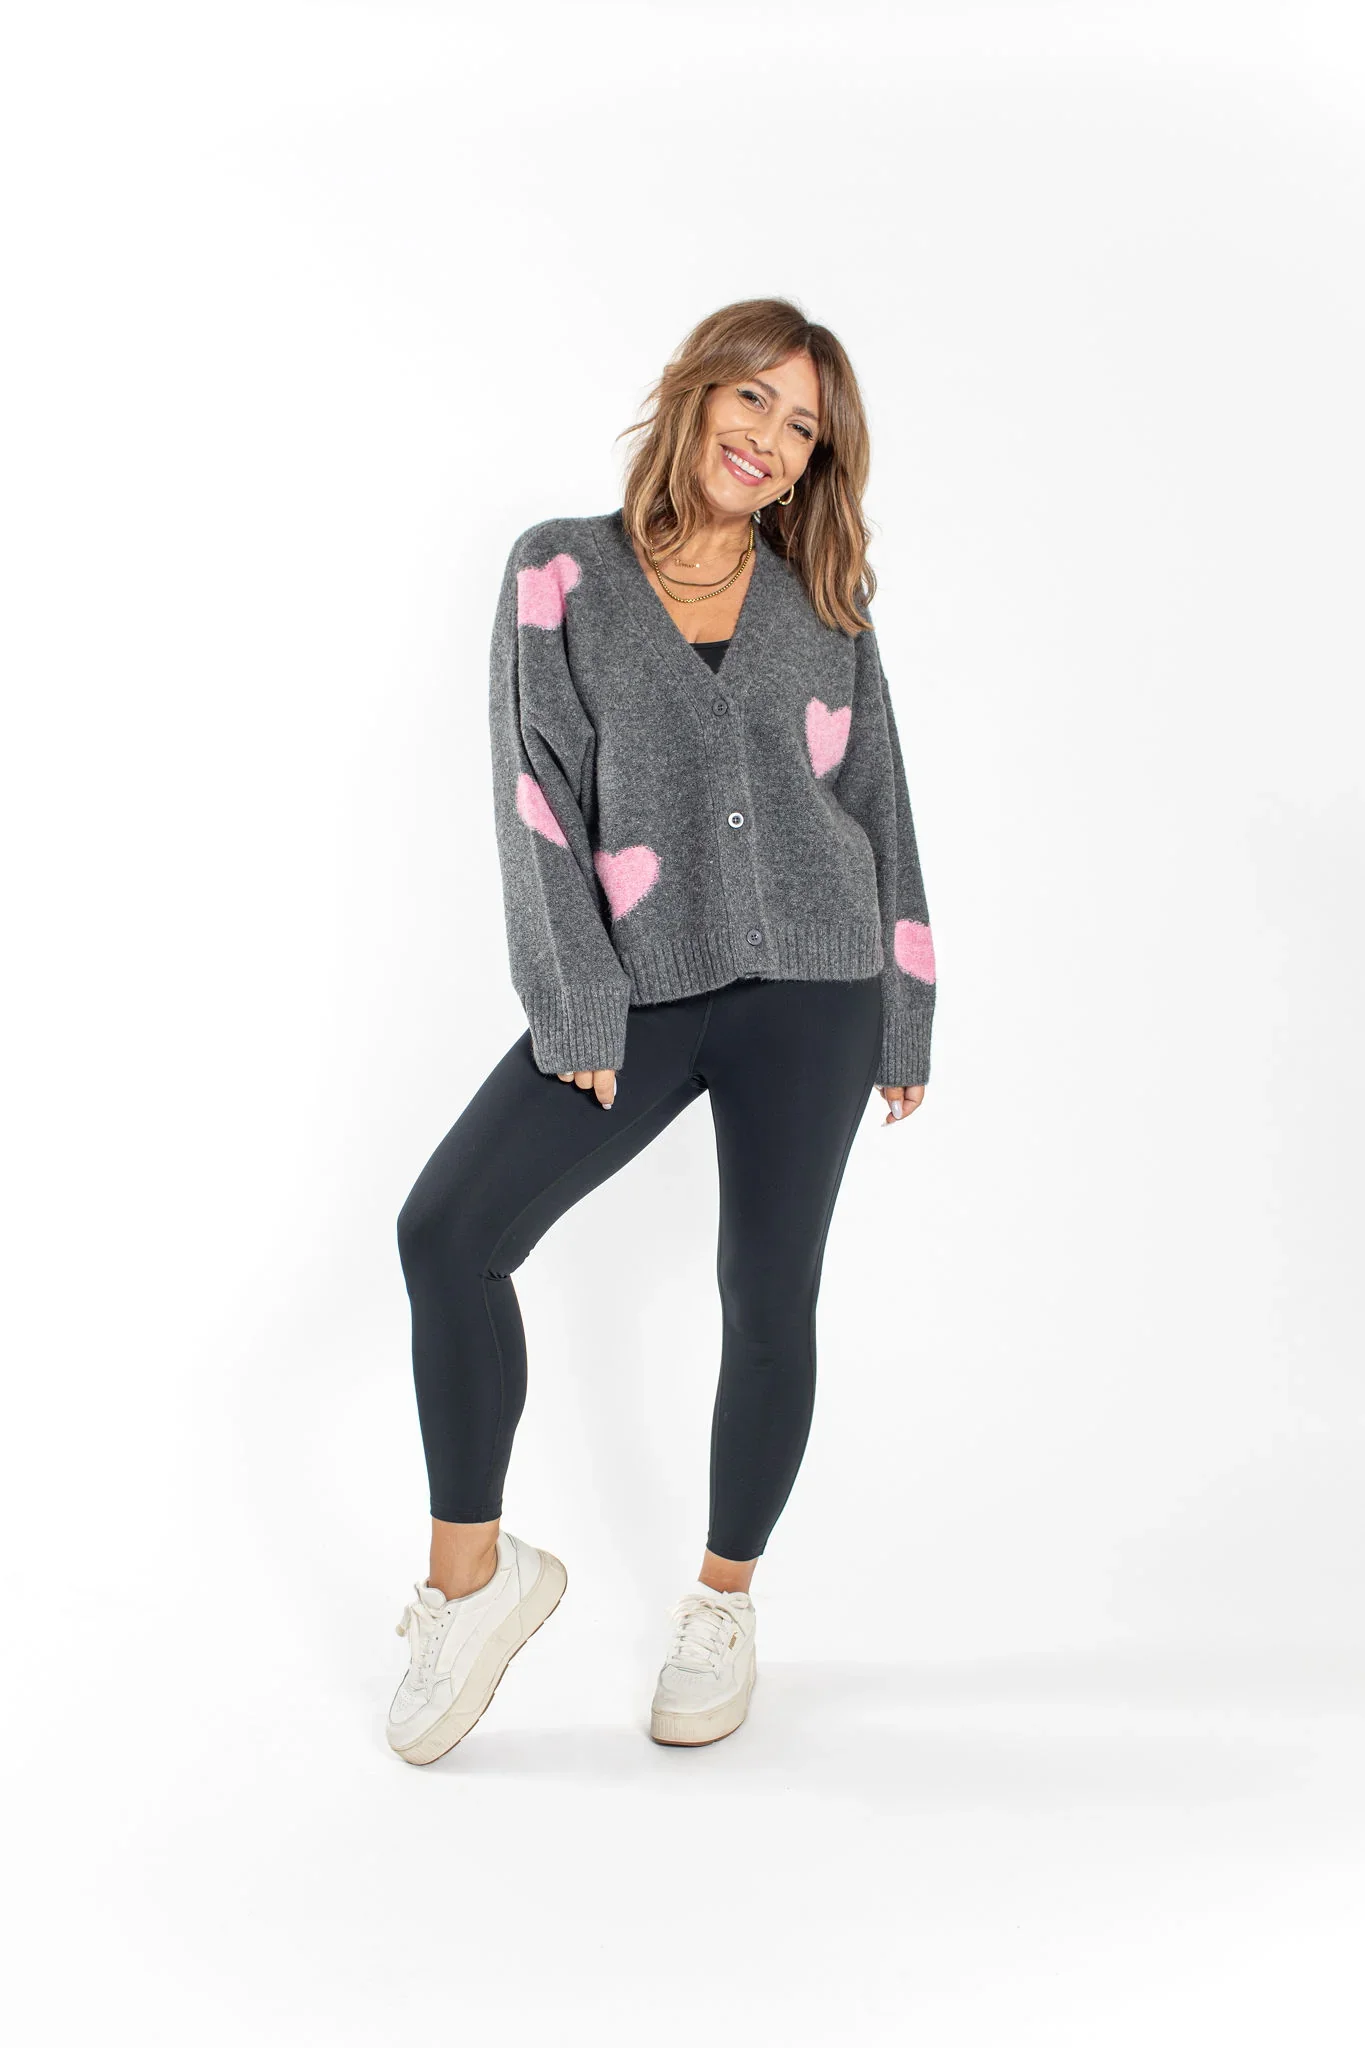 Image of Eloise Heart Cardigan in Heather Charcoal Combo